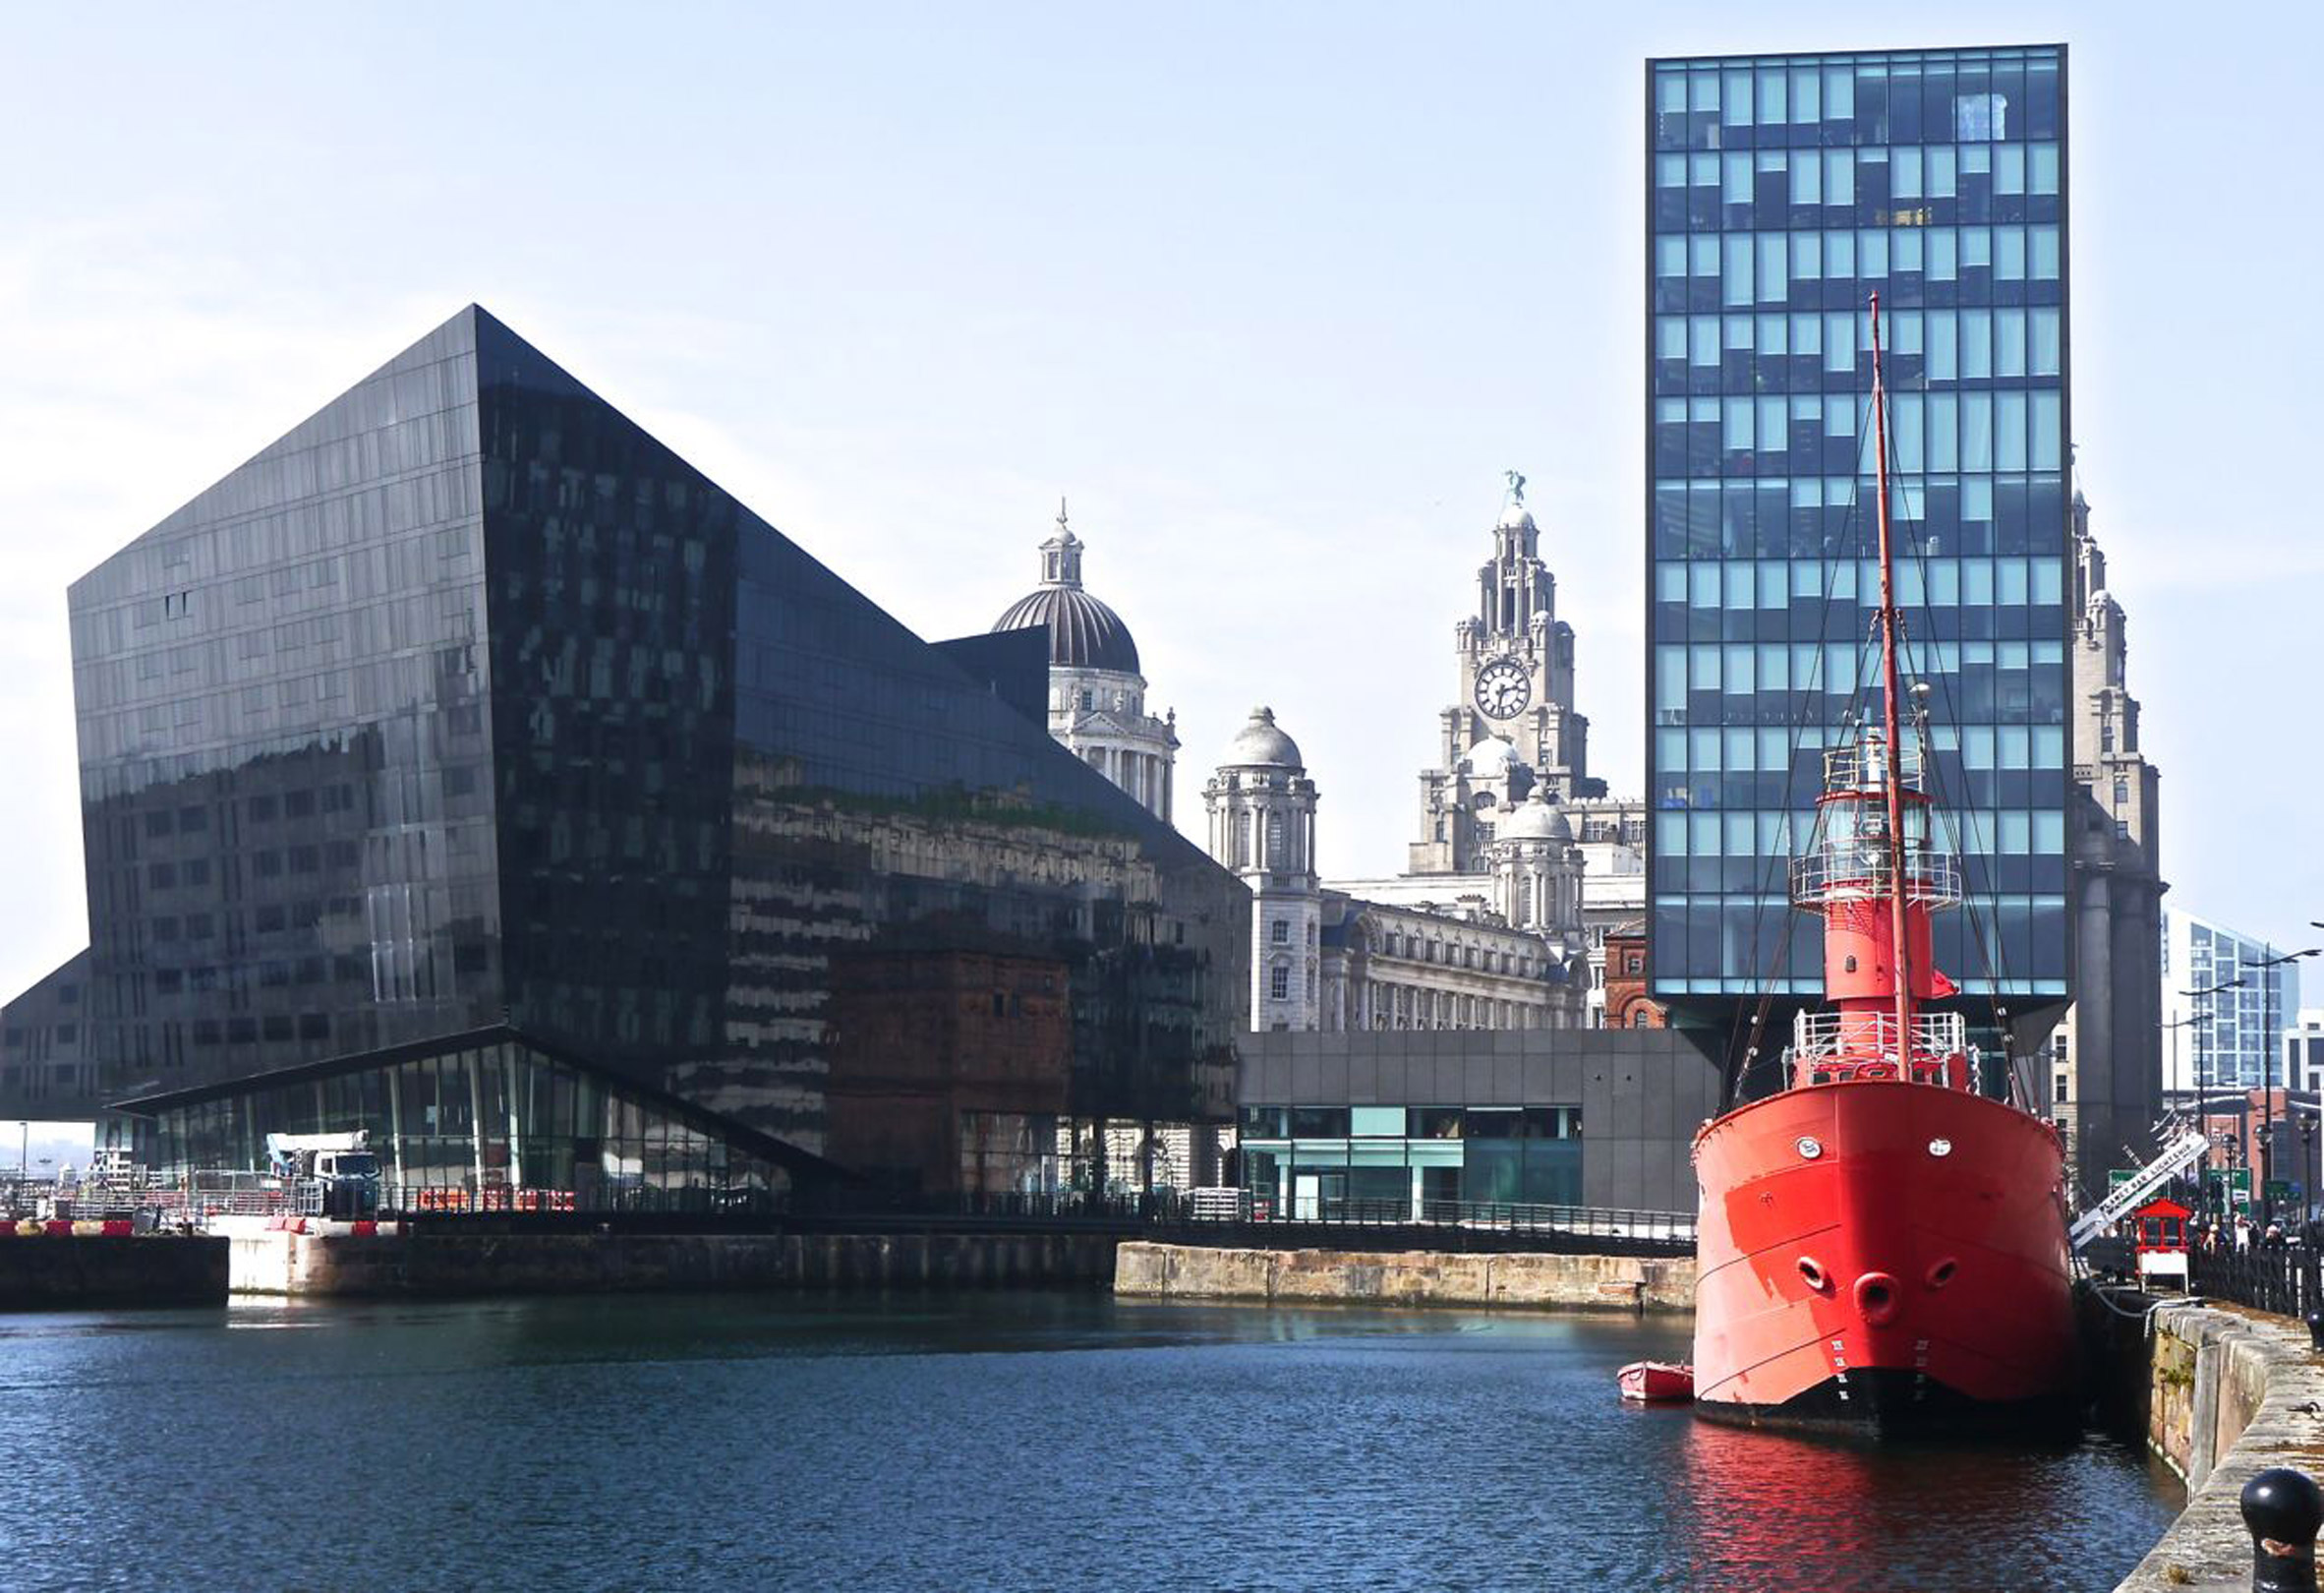 RIBA set to open dockside architecture centre in Liverpool this June